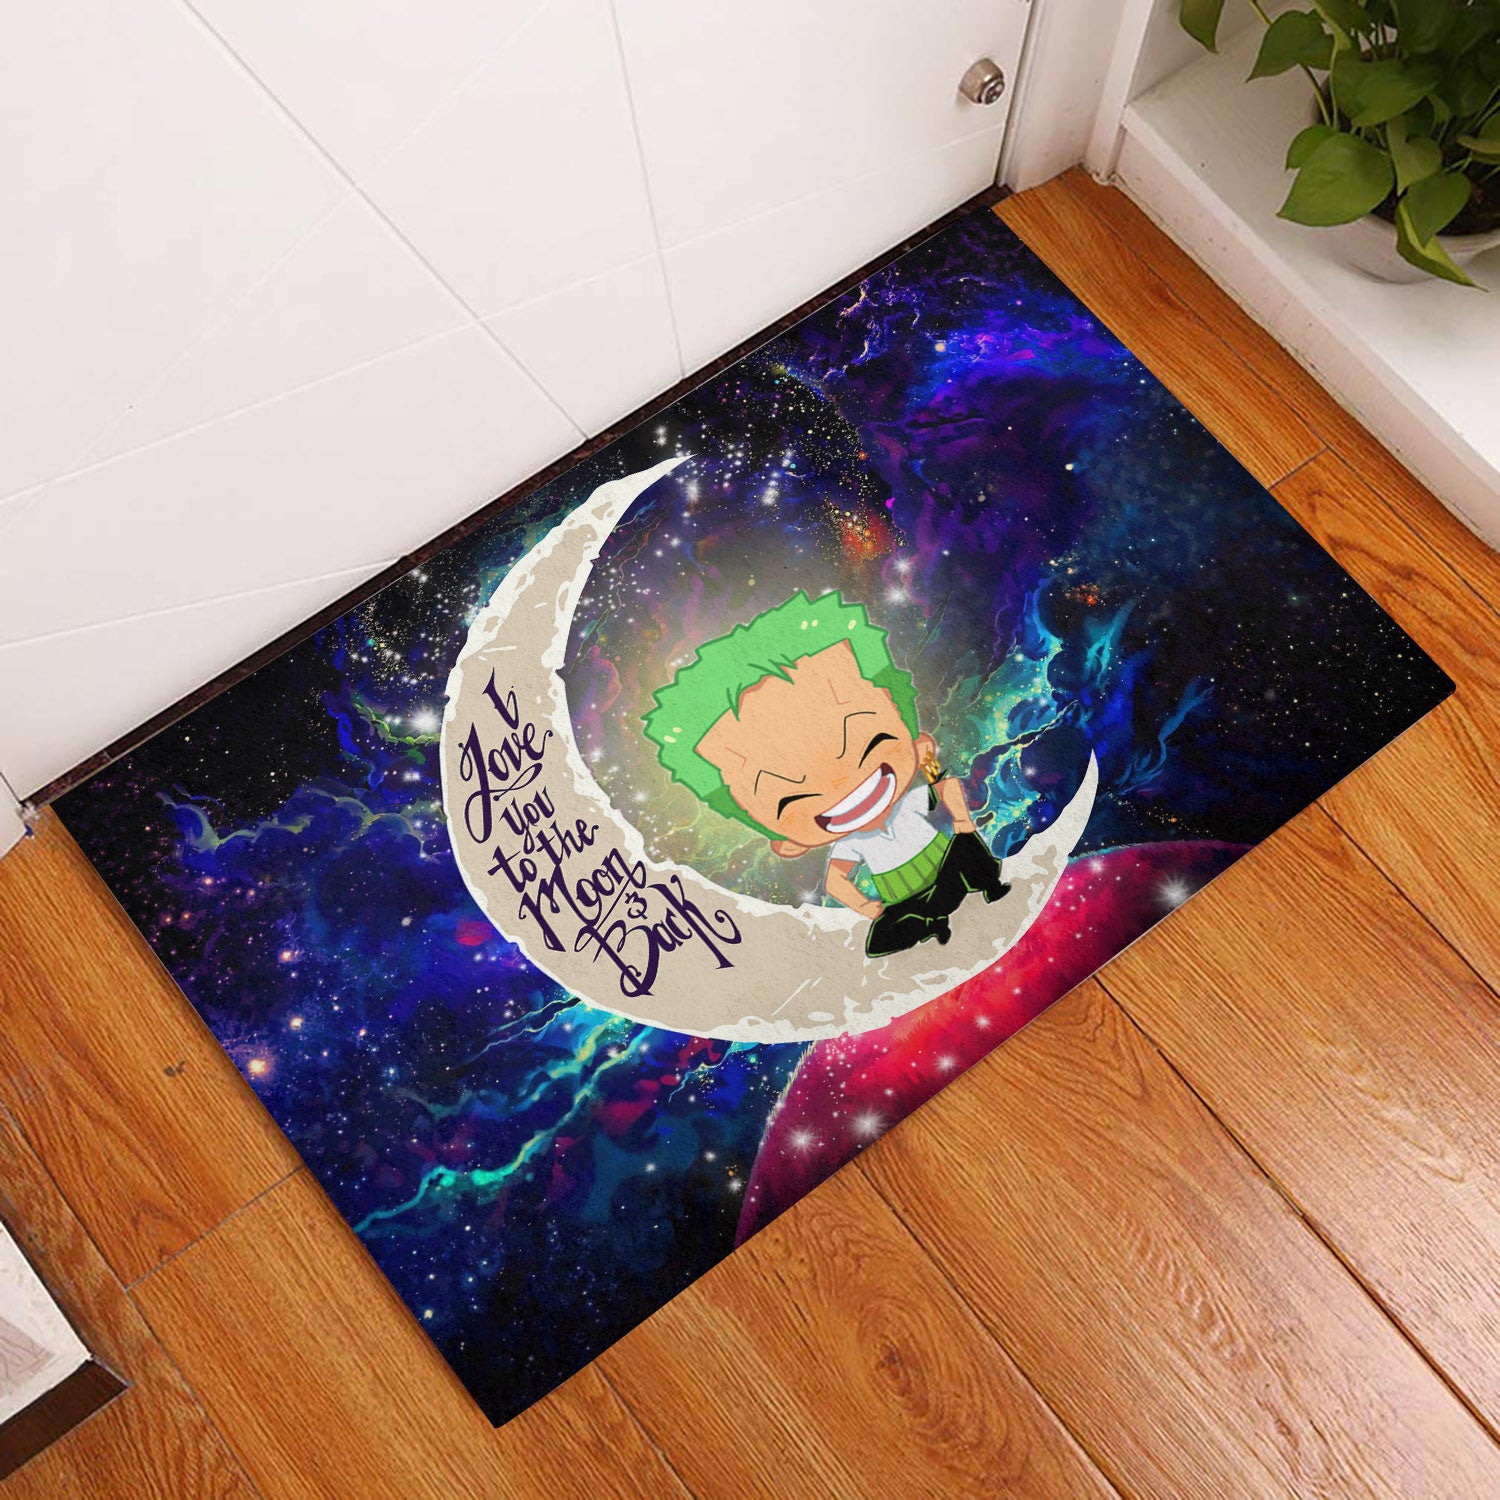 Zoro One Piece Love You To The Moon Galaxy Back Door Mats Home Decor